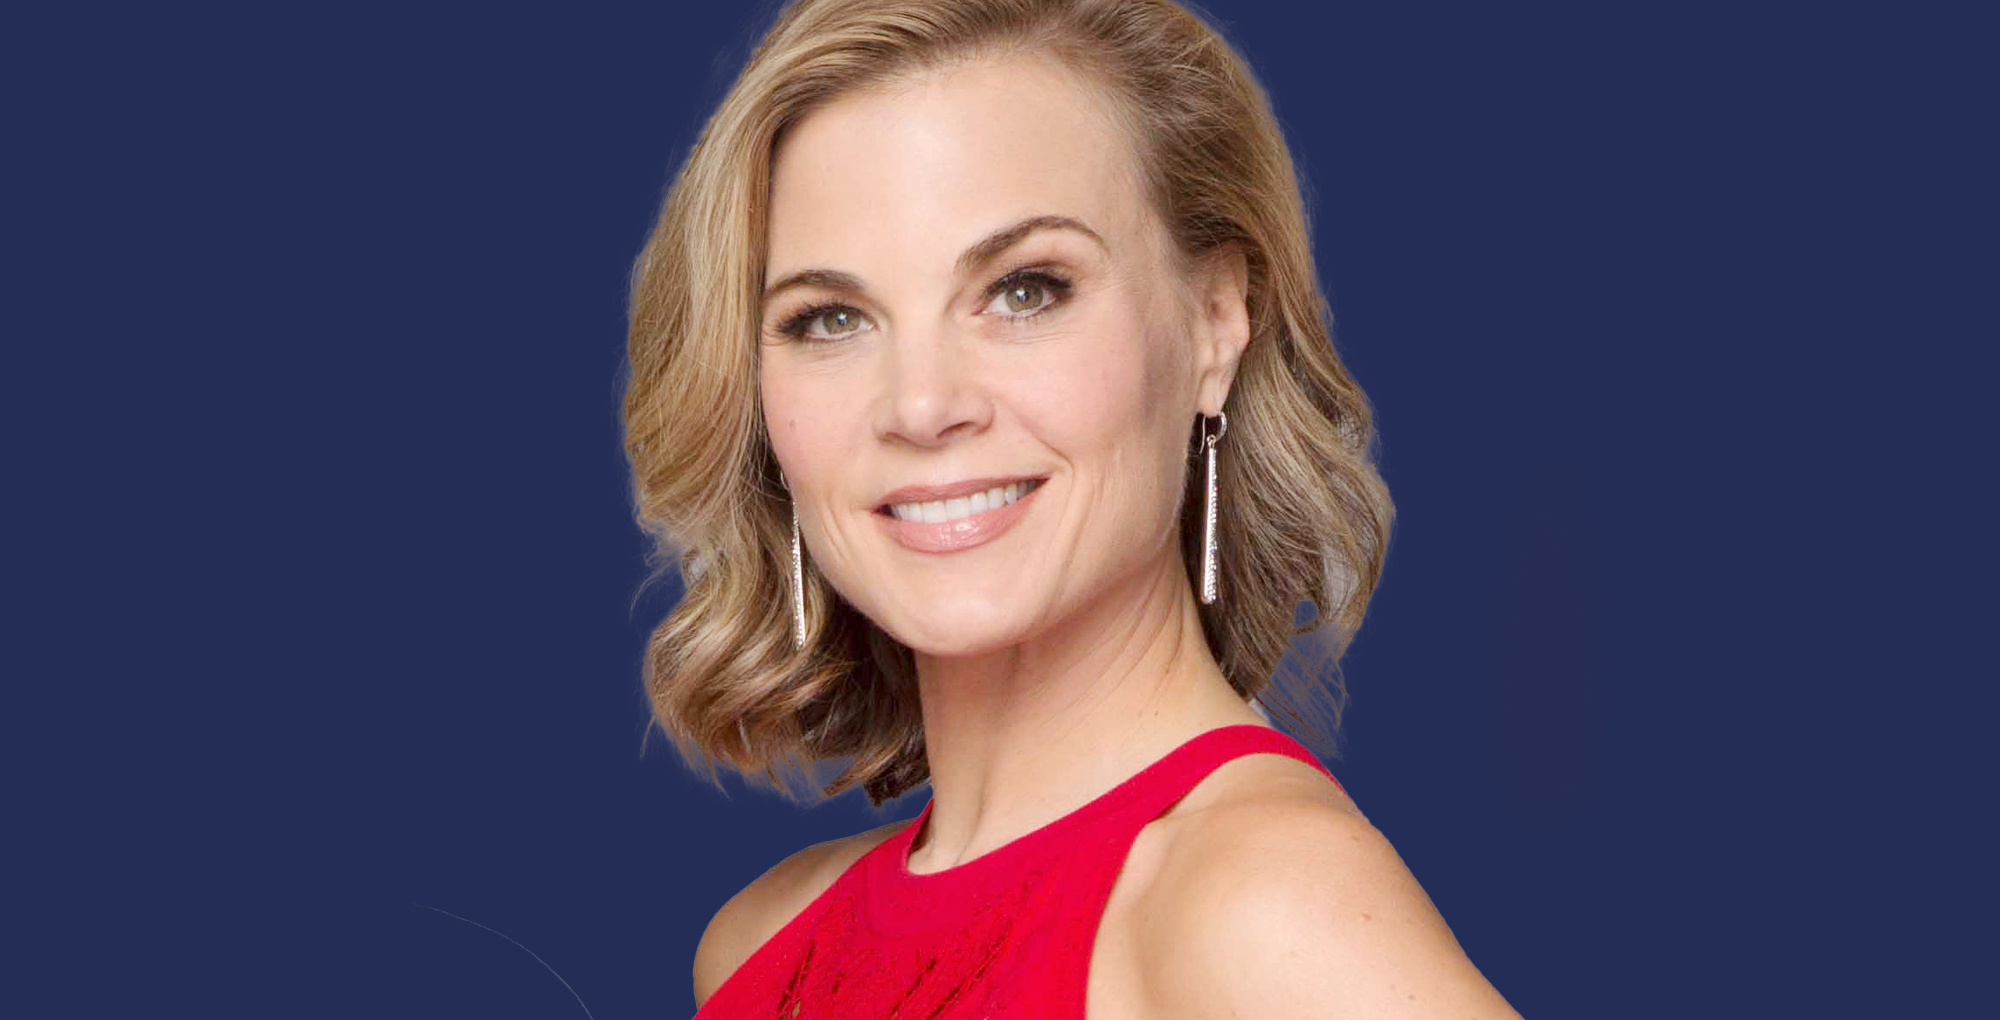 gina tognoni was phyllis on the young and the restless.